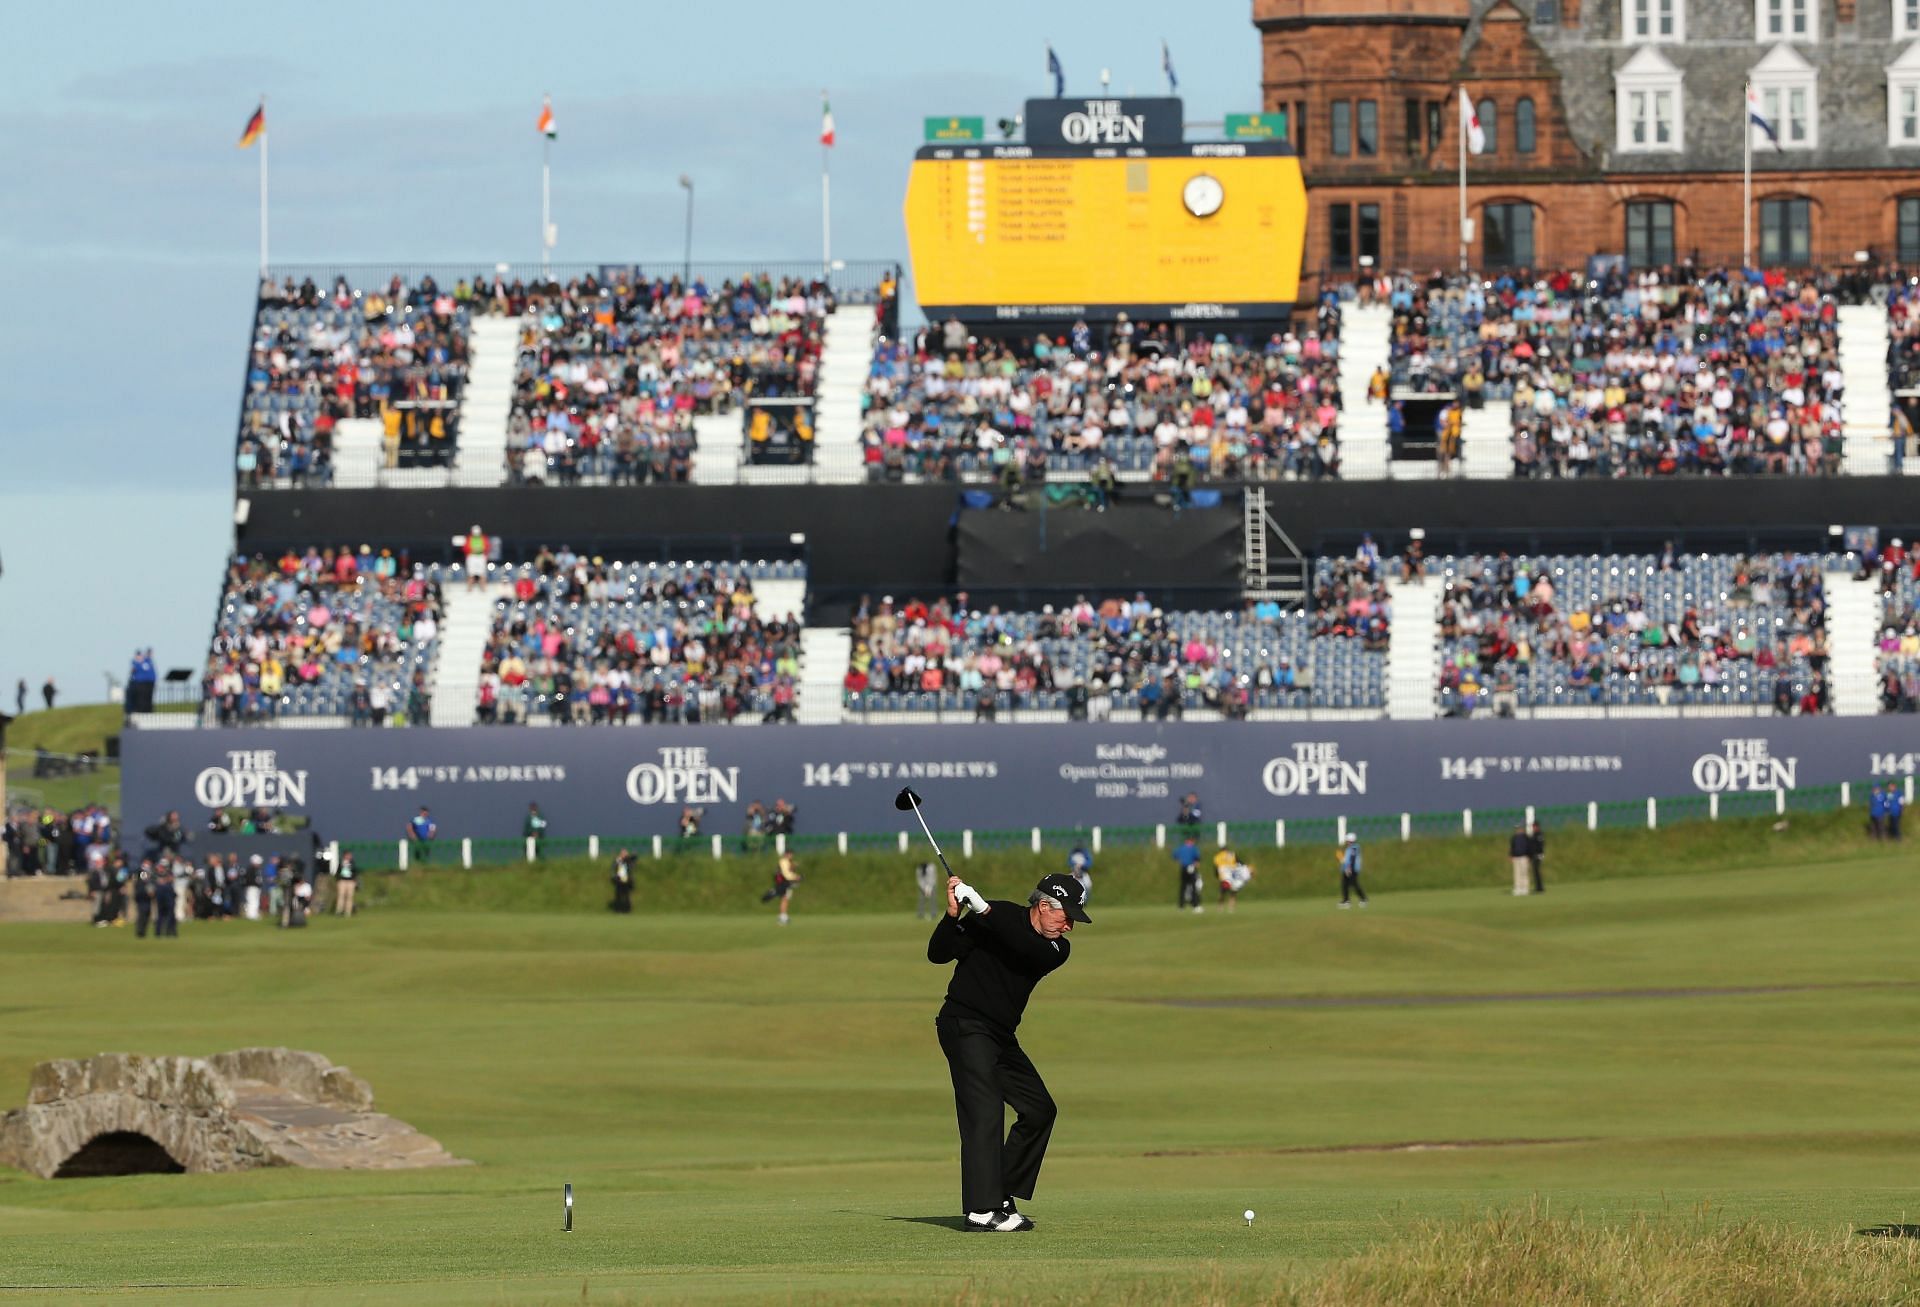 Gary Player at the 144th Open Championship - Champion Golfers&#039; Challenge (Image via Mike Ehrmann/Getty Images)